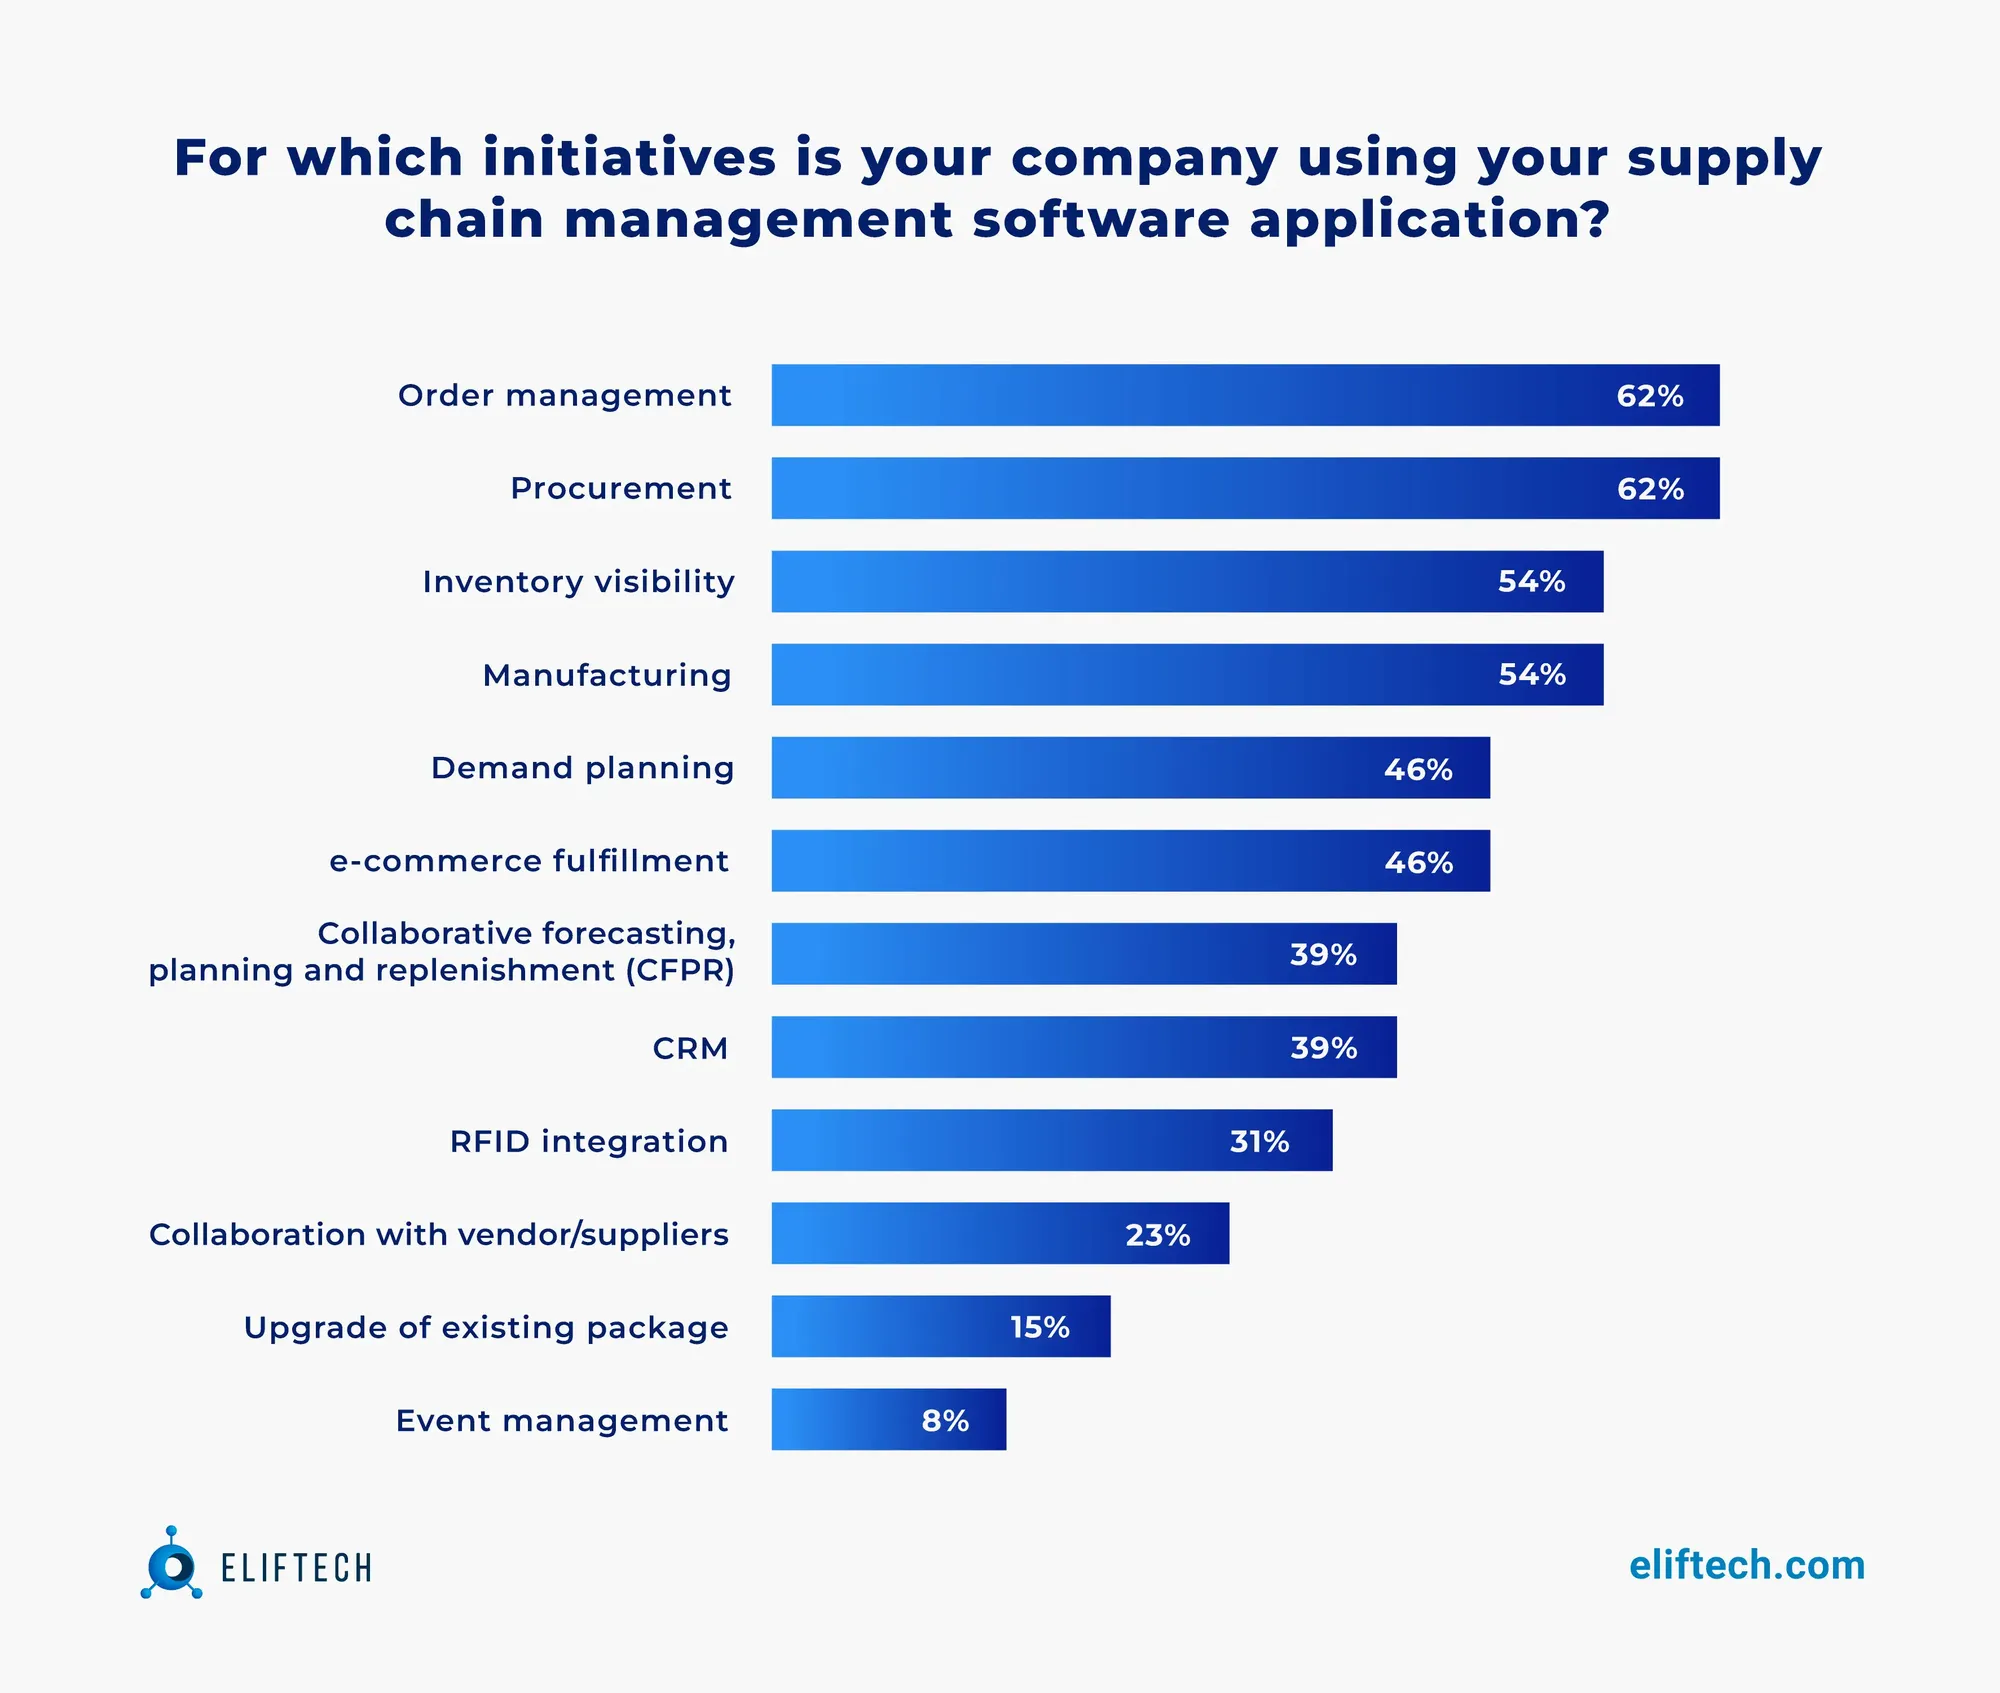 62% of companies use supply chain software applications to adress order management